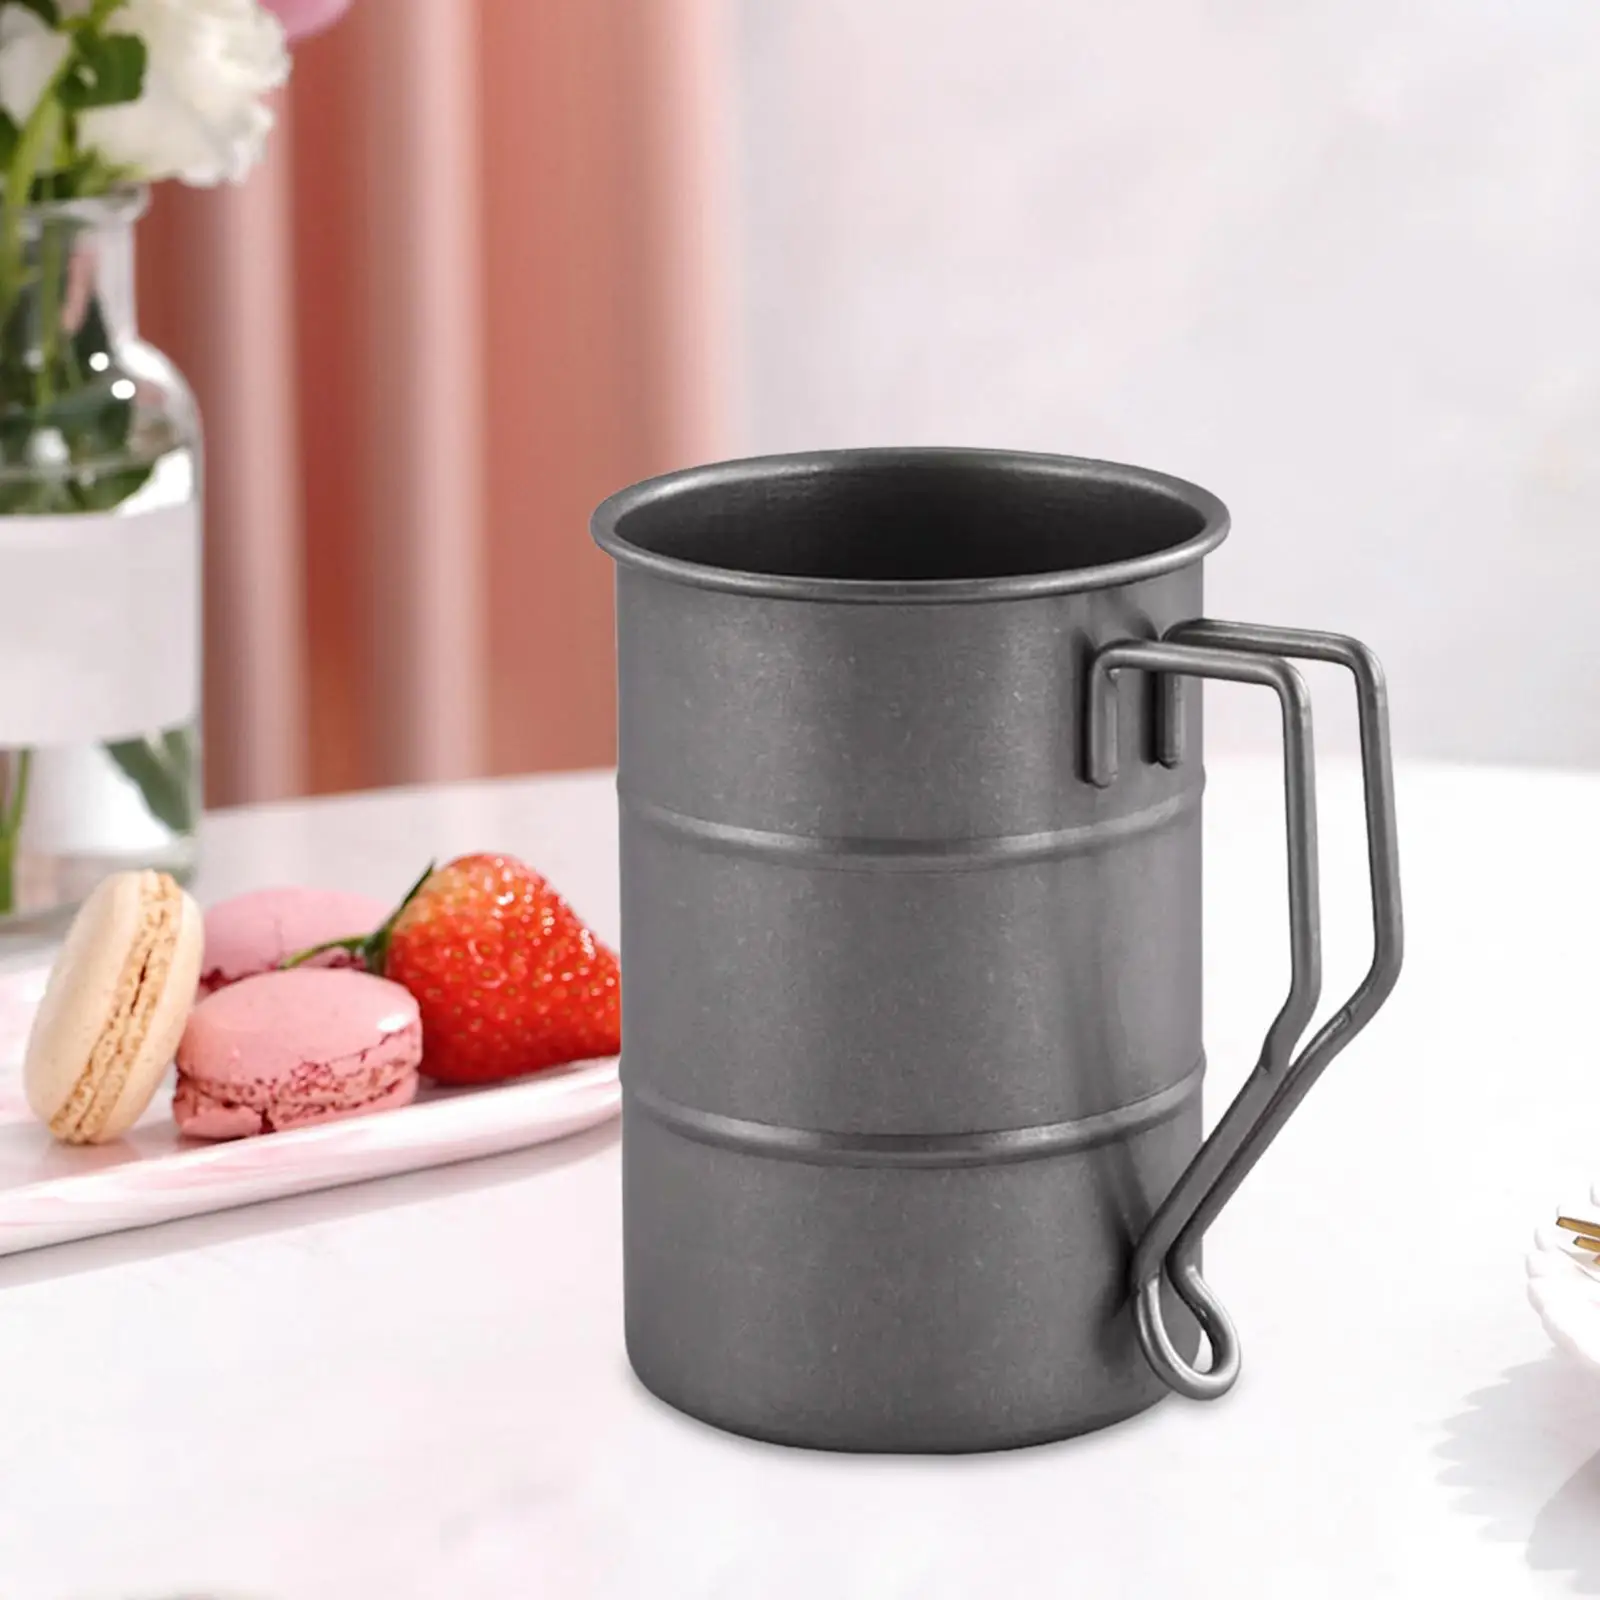 Drinking Cup Cold Water Cup Reusable Stainless Steel Milk Mugs Gargle Cups Tea Mugs for Outdoor Hiking Kitchen Fishing Travel